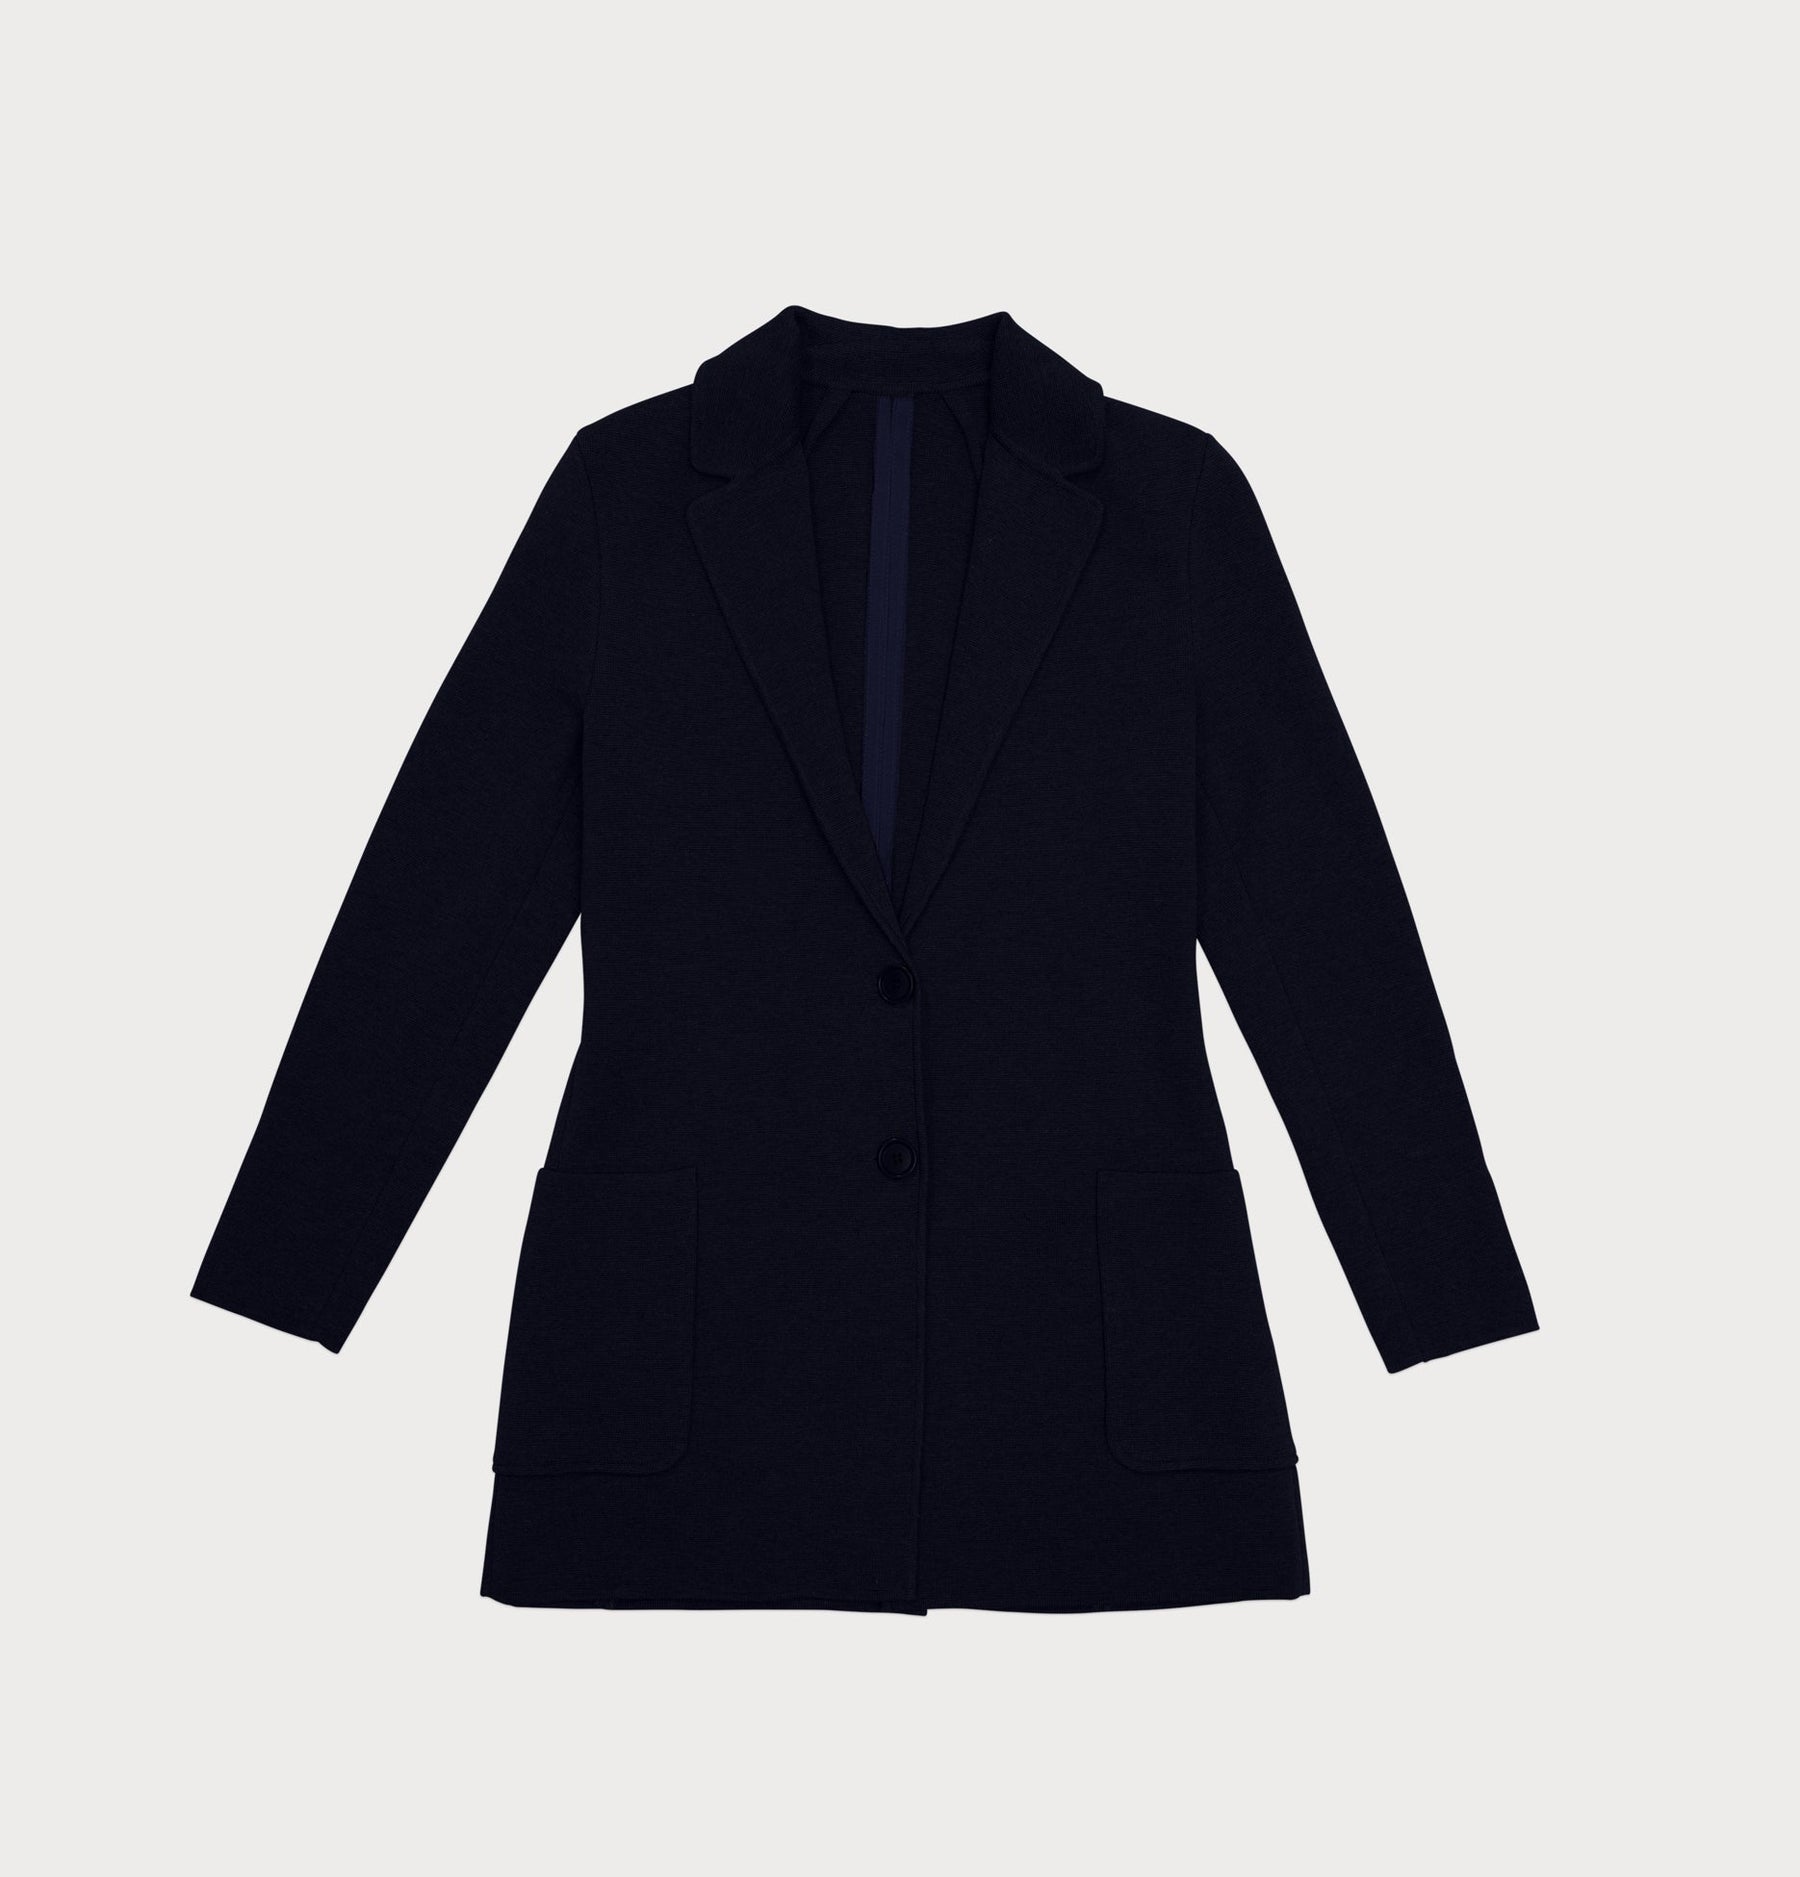 organic pima cotton blazer for women in navy made from sustainable materials